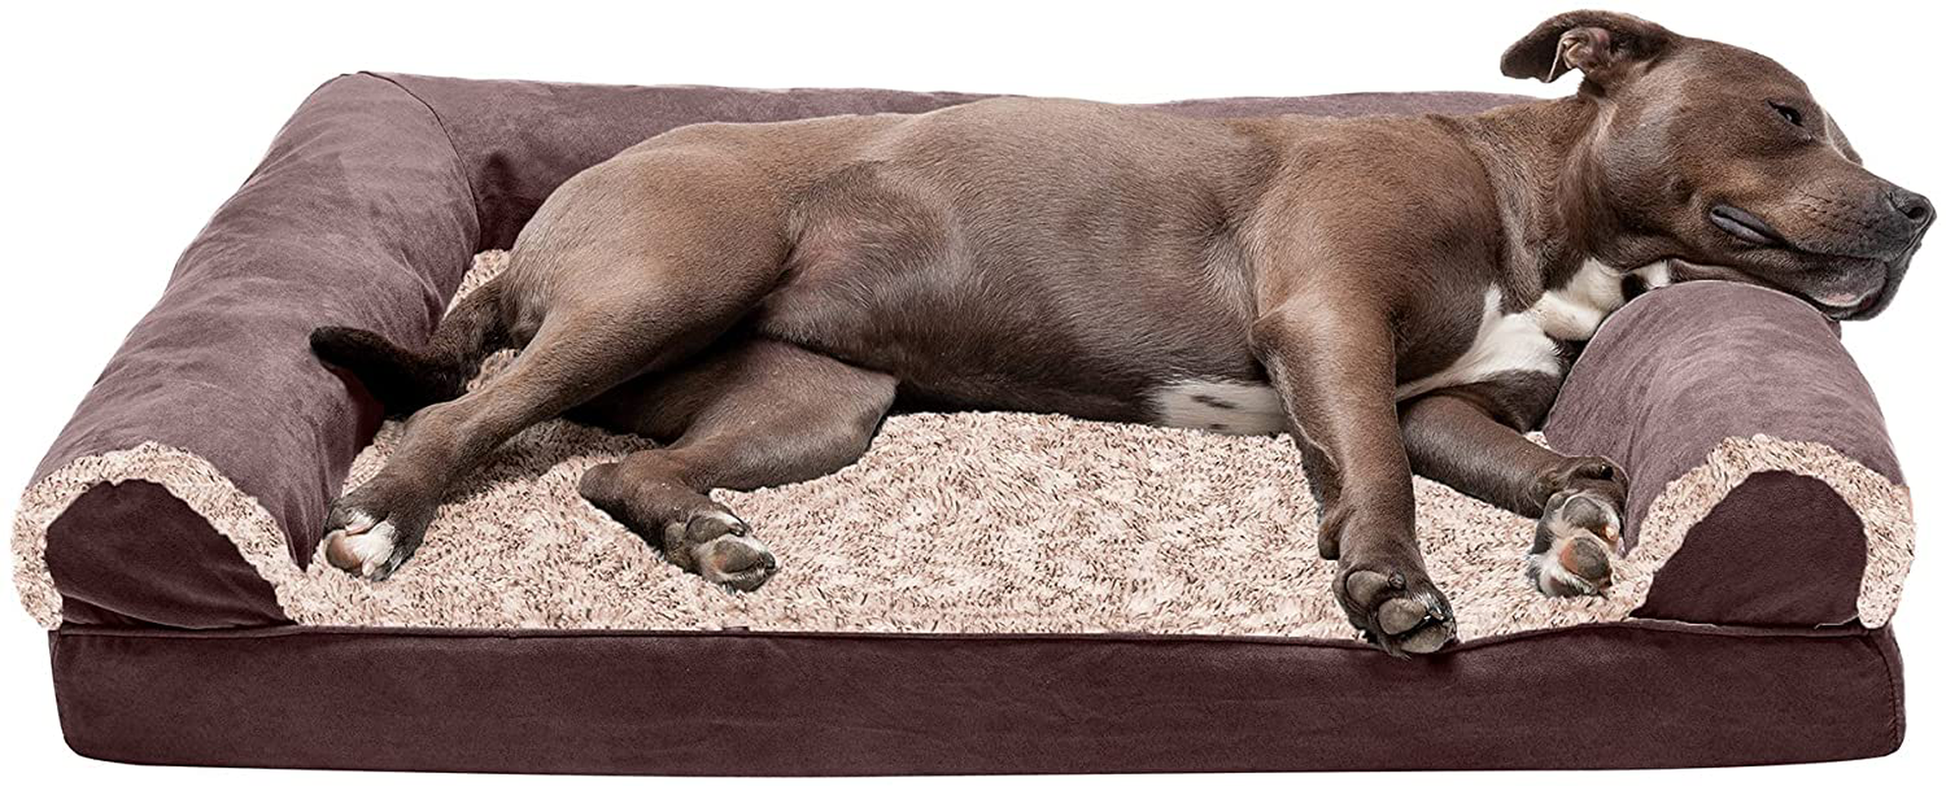 CALM-N-COMFY Orthopedic Pet Beds - Sofa and Mattress Tonal Faux Fur and Suede Orthopedic Dog Beds with Removable Washable Cover for Dogs and Cats - Multiple Colors and Sizes Animals & Pet Supplies > Pet Supplies > Dog Supplies > Dog Beds CALM-N-COMFY Sofa - Espresso Large 